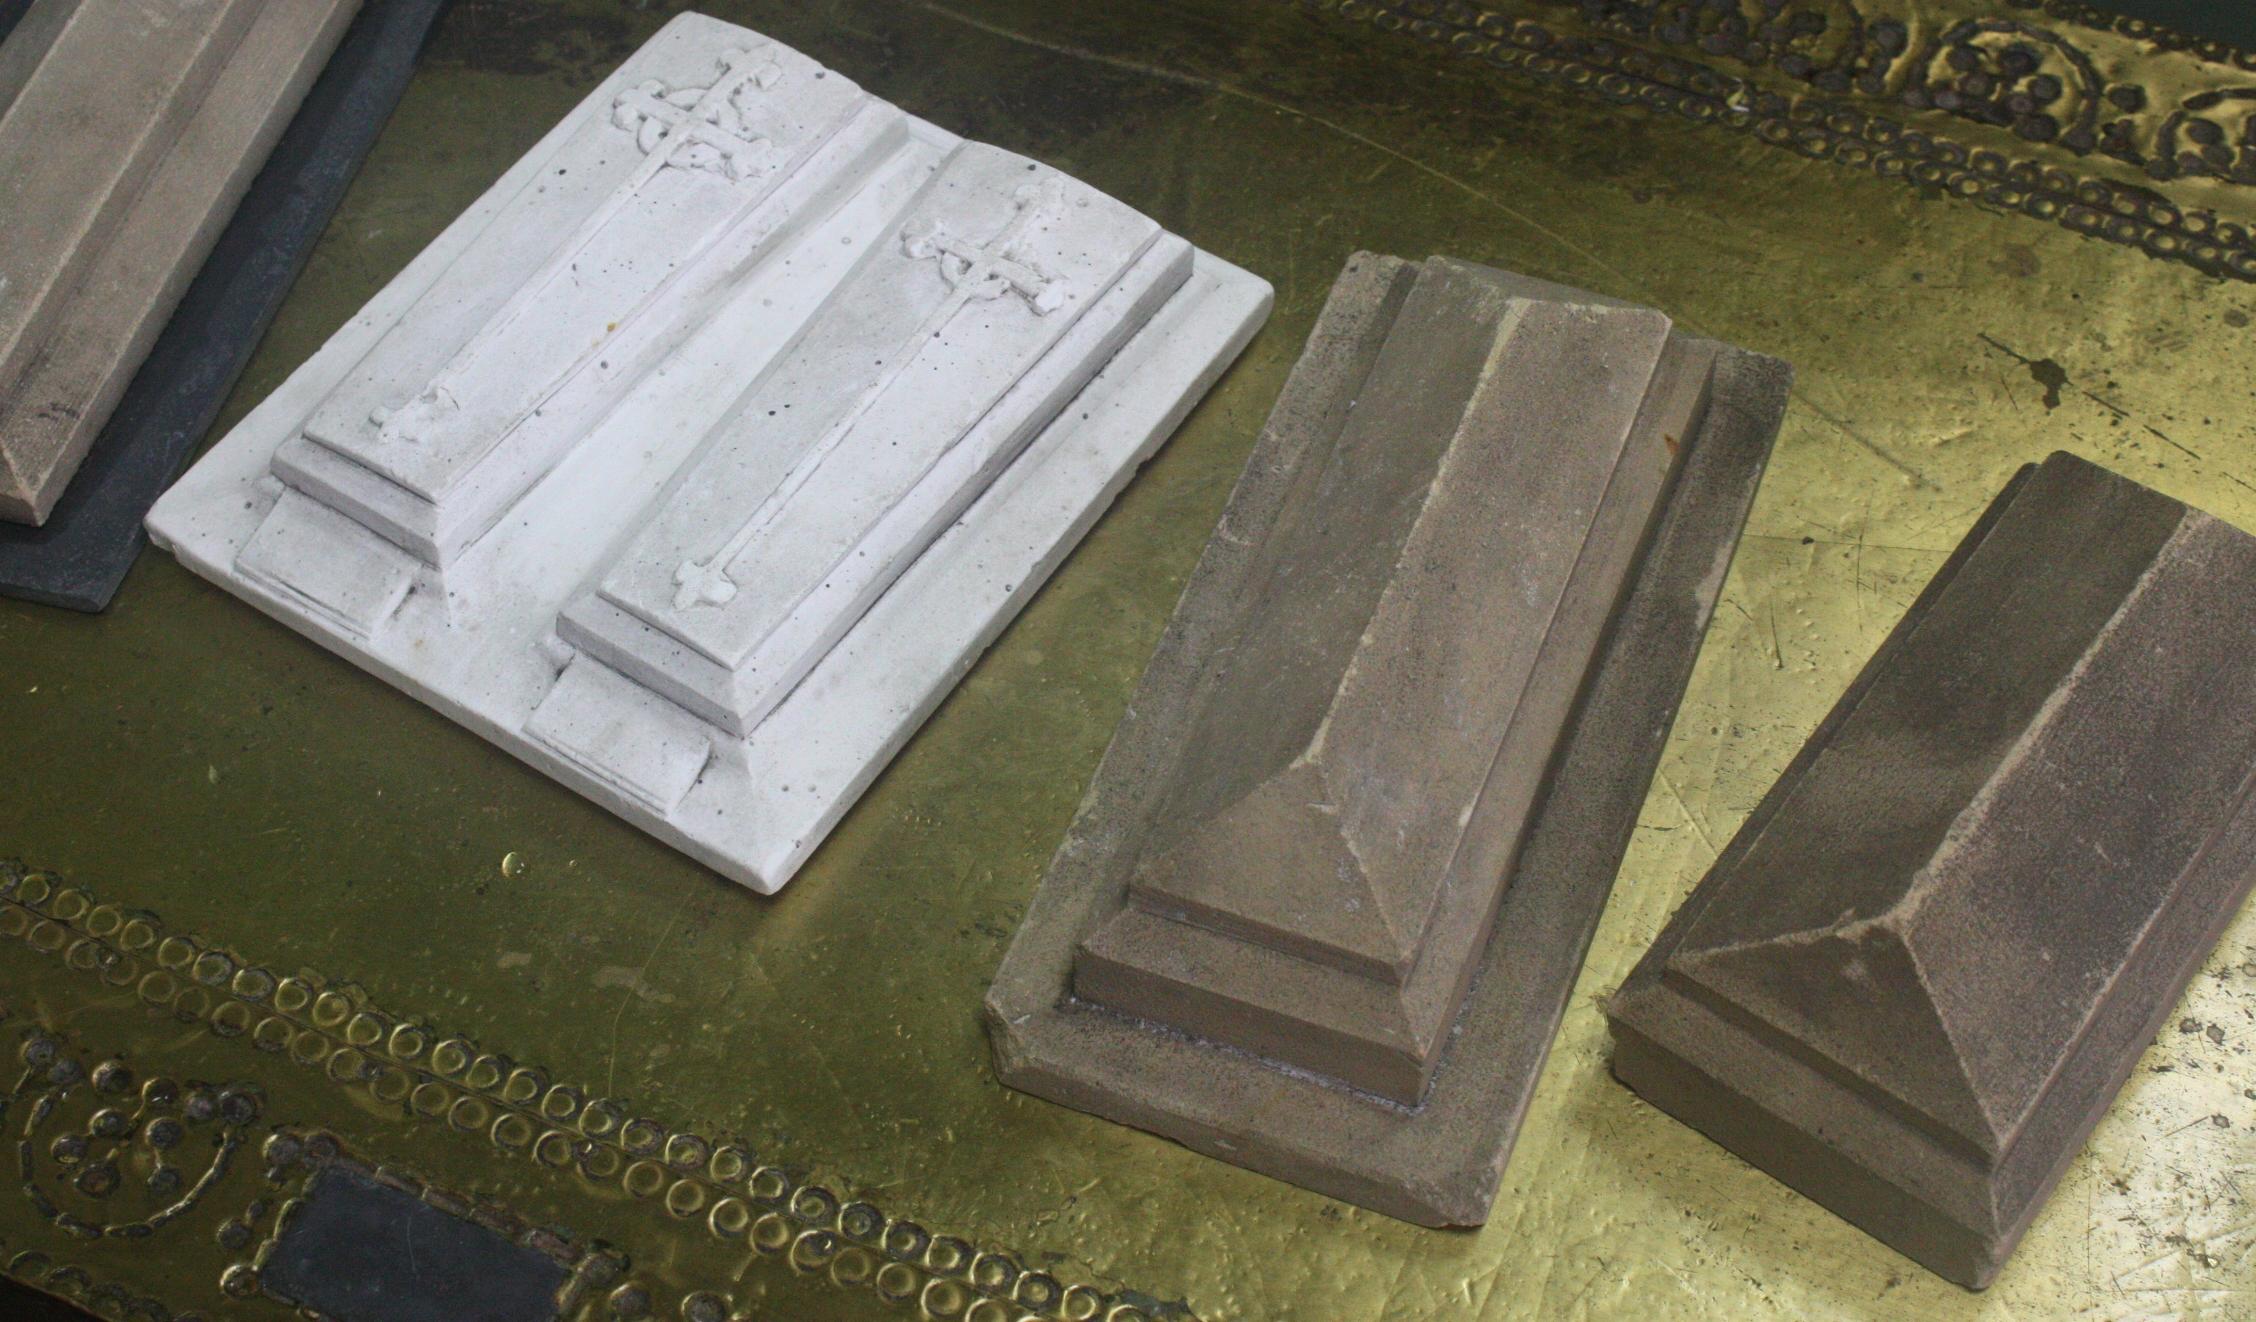 A collection of four undertakers tombstone samples for prospective customers. One is cast in plaster, the other three examples in carved sandstone. Age related chips and discoloration. Early 20th century in age, would make for decorative paper